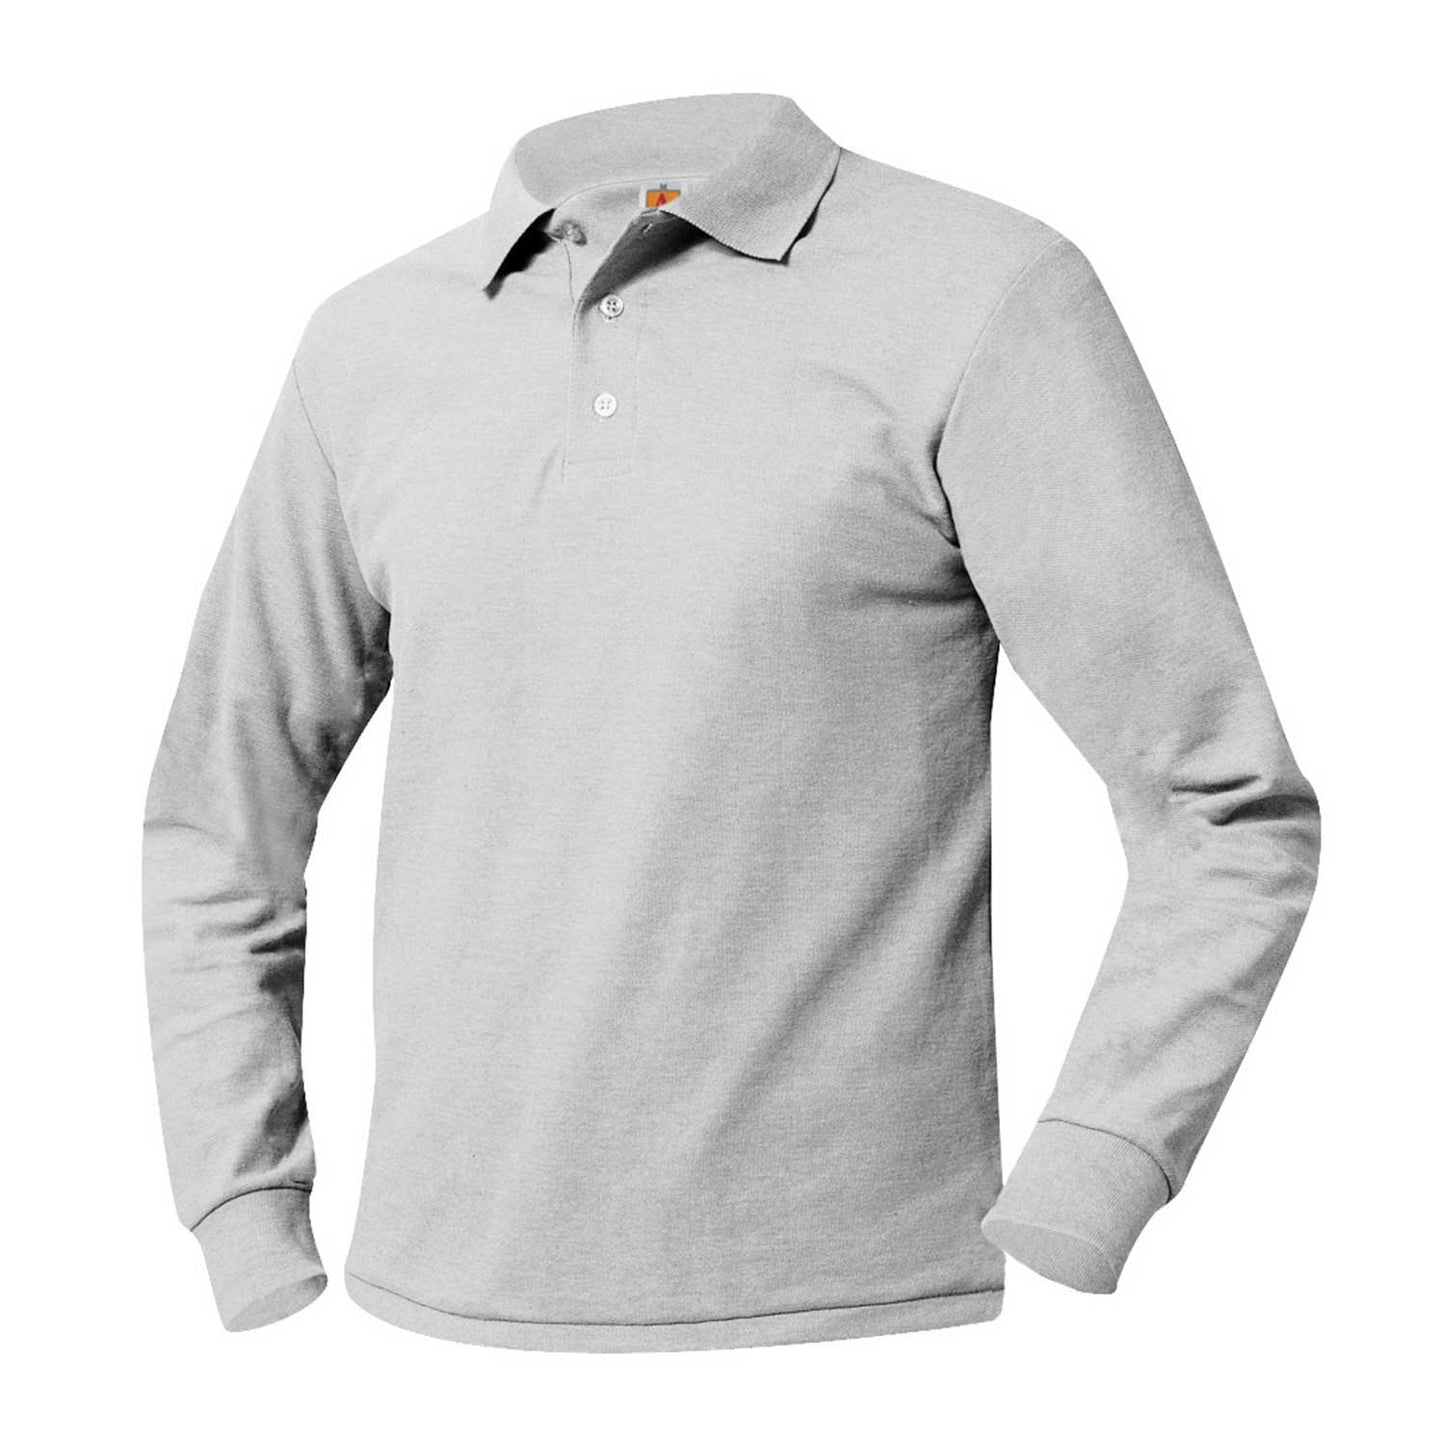 Men's/Unisex Pique Polo Shirt, Long Sleeves, Ribbed Cuffs - 1227